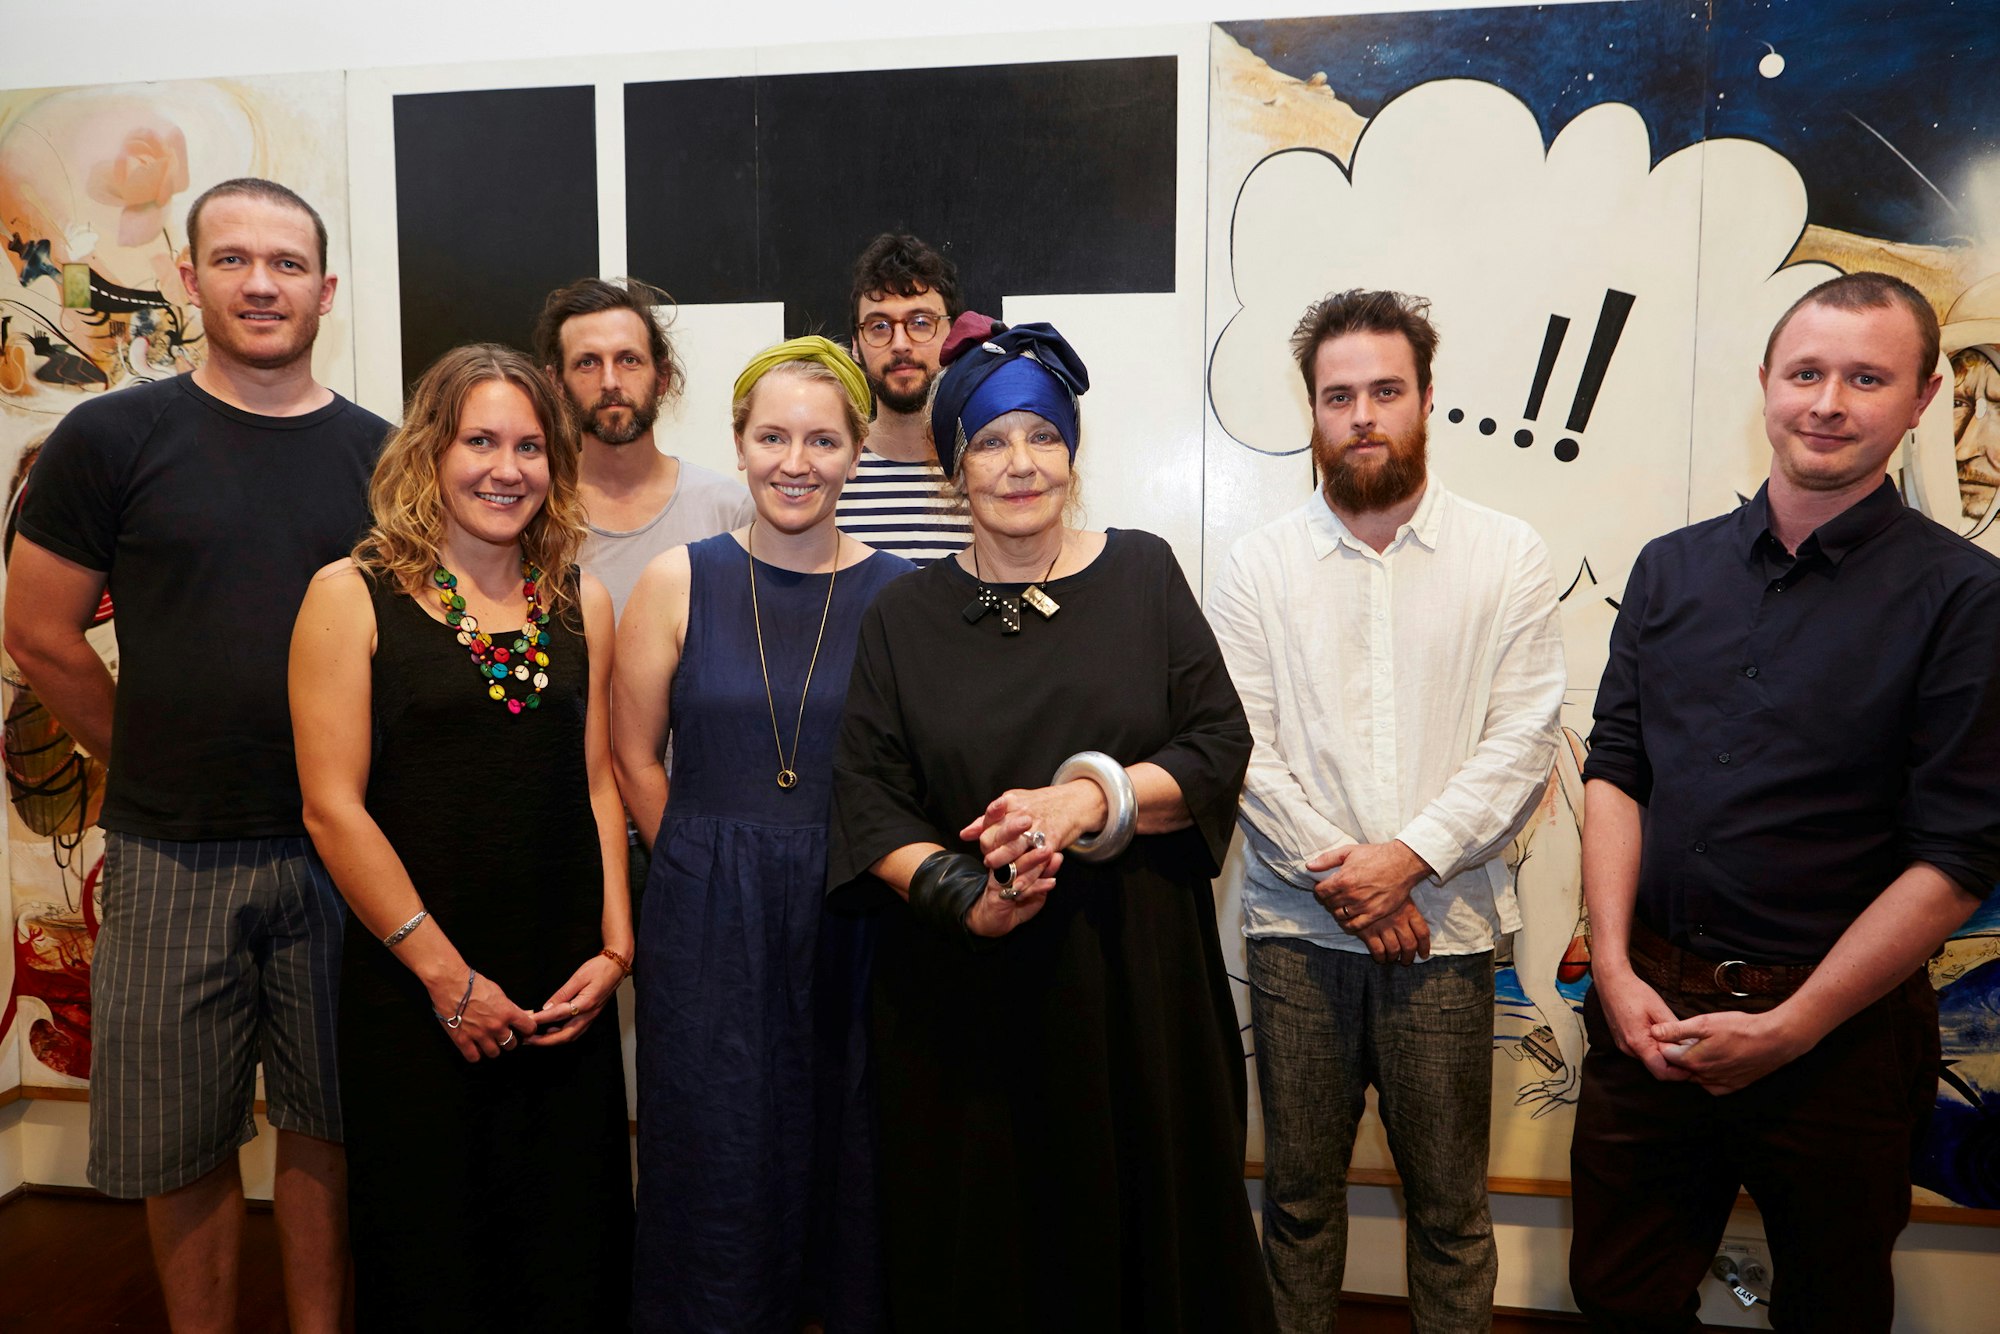 Previous winners of the Brett Whiteley Travelling Art Scholarship with Wendy Whiteley (left to right): Alan Jones, Nicole Kelly, Nathan Hawkes, Becky Gibson, Belem Lett, Wendy Whiteley, James Drinkwater, Mitch Cairns